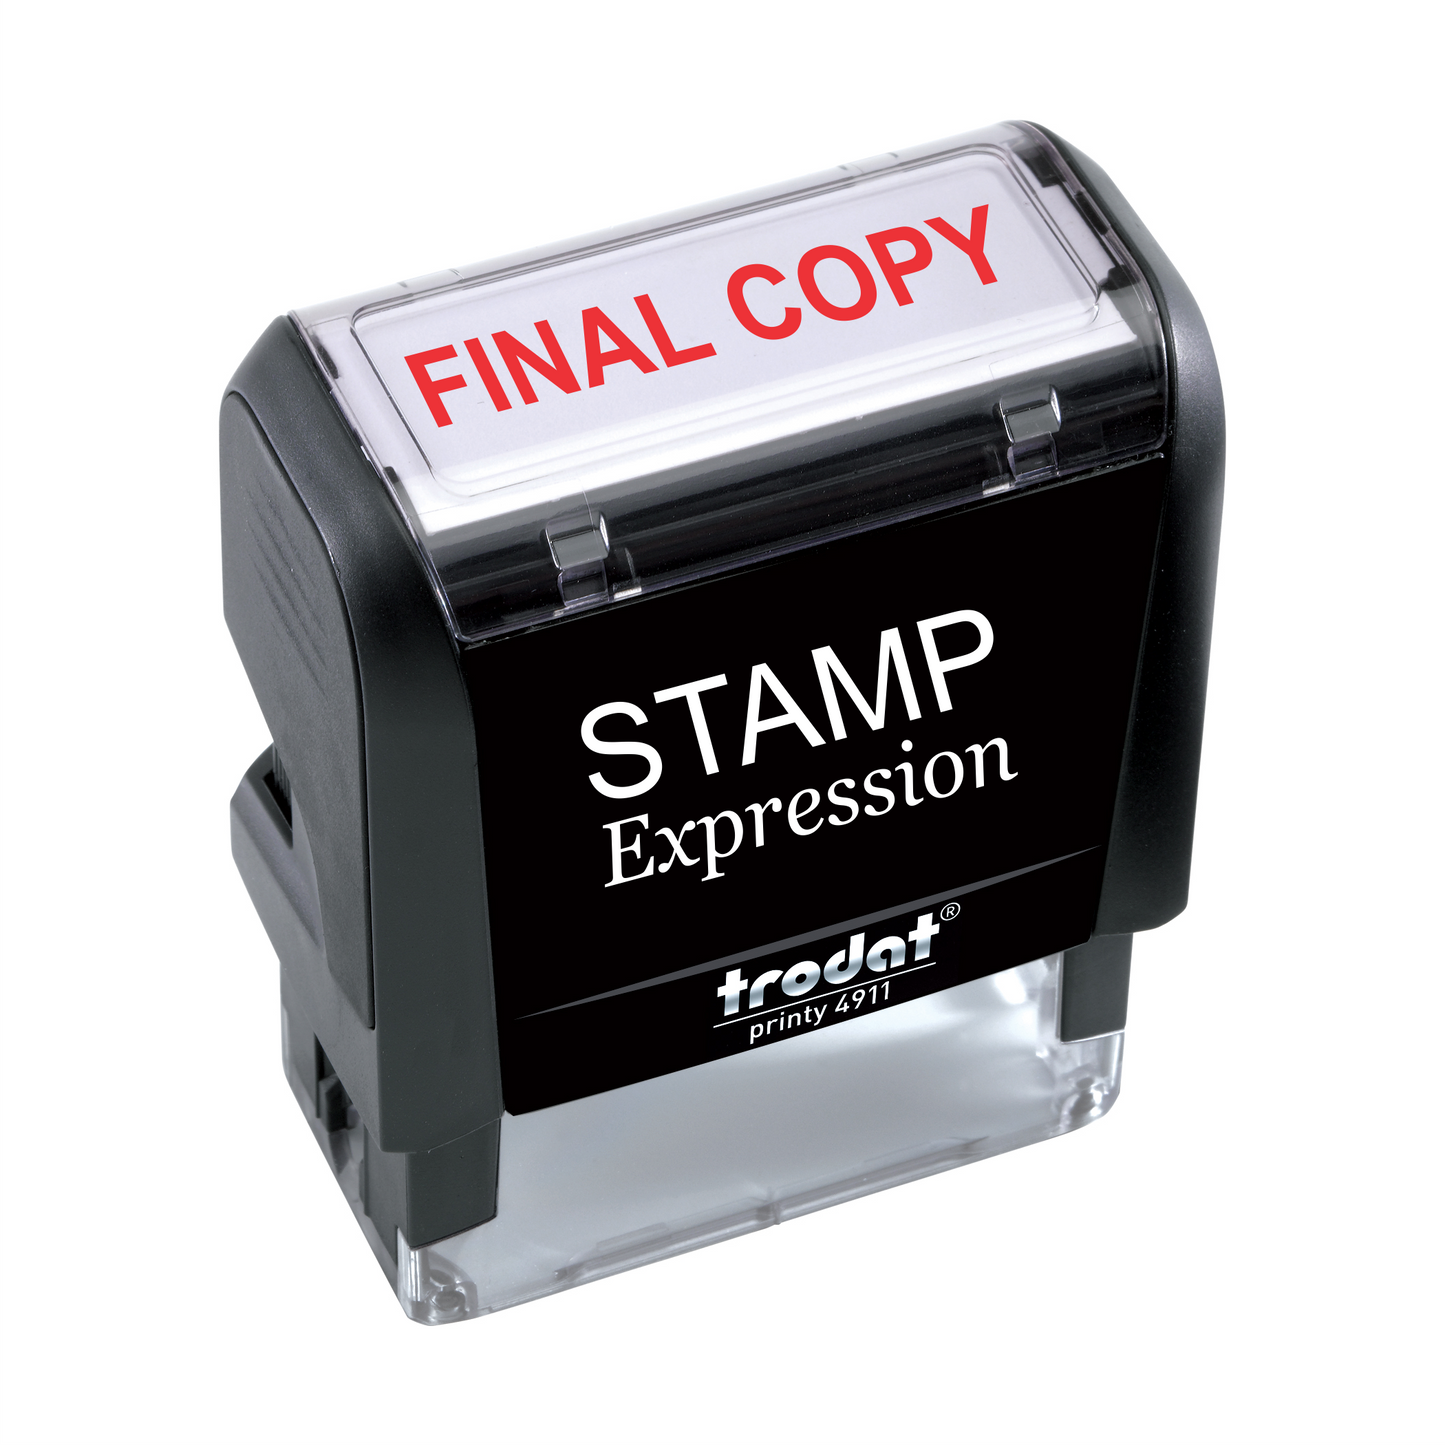 Final Copy Office Self Inking Rubber Stamp (SH-5521)